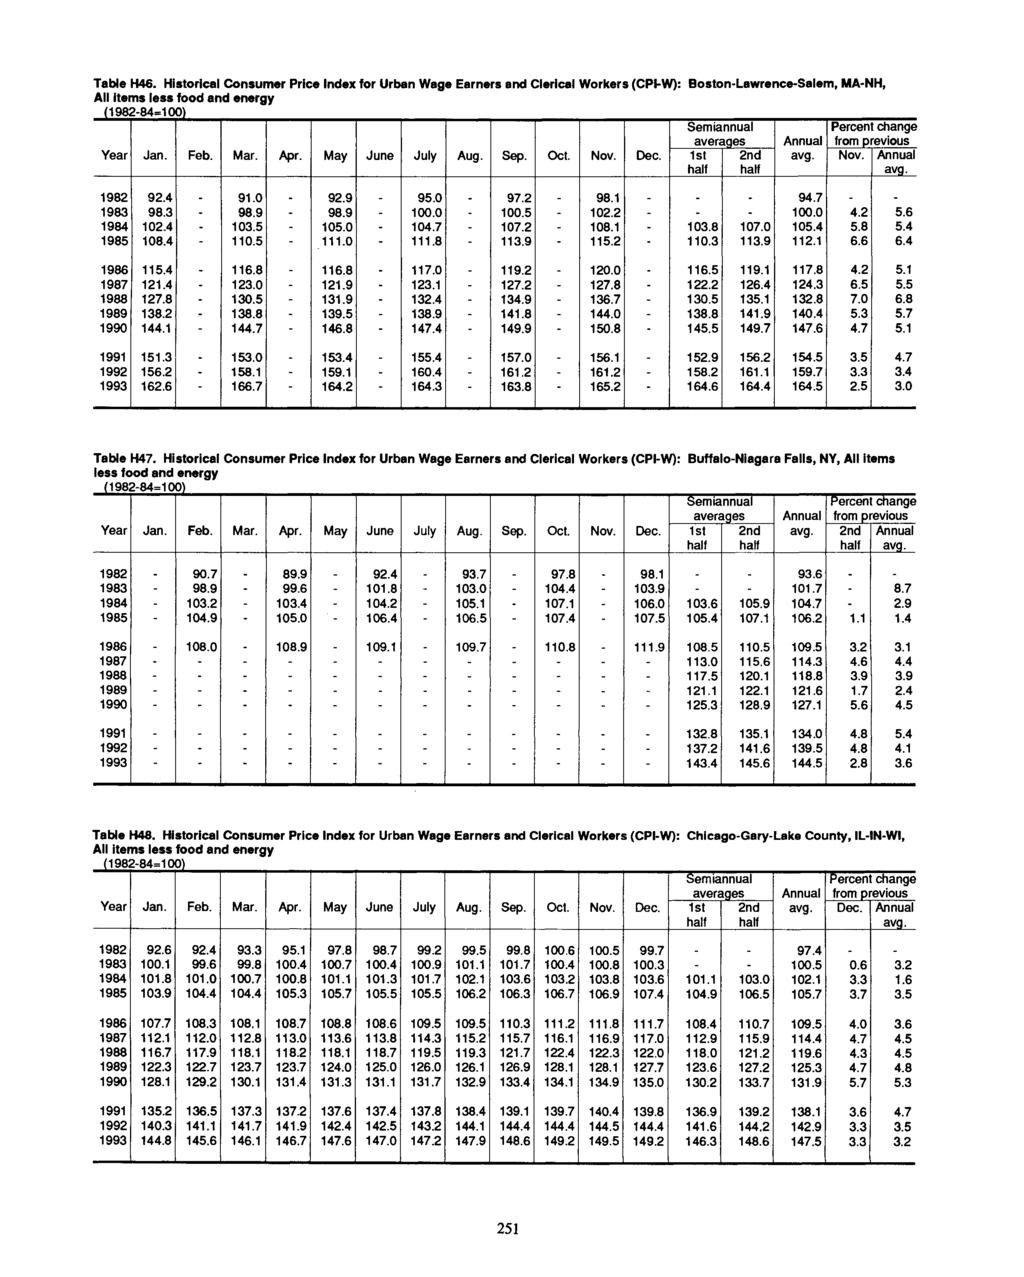 Table H46. Historical Consumer Price for Urban Wage Earners and Clerical Workers (CPI-W): Boston-Lawrence-Salem, MA-NH, All items less food and energy (1982-84=100) Year Feb. Mar. Apr.